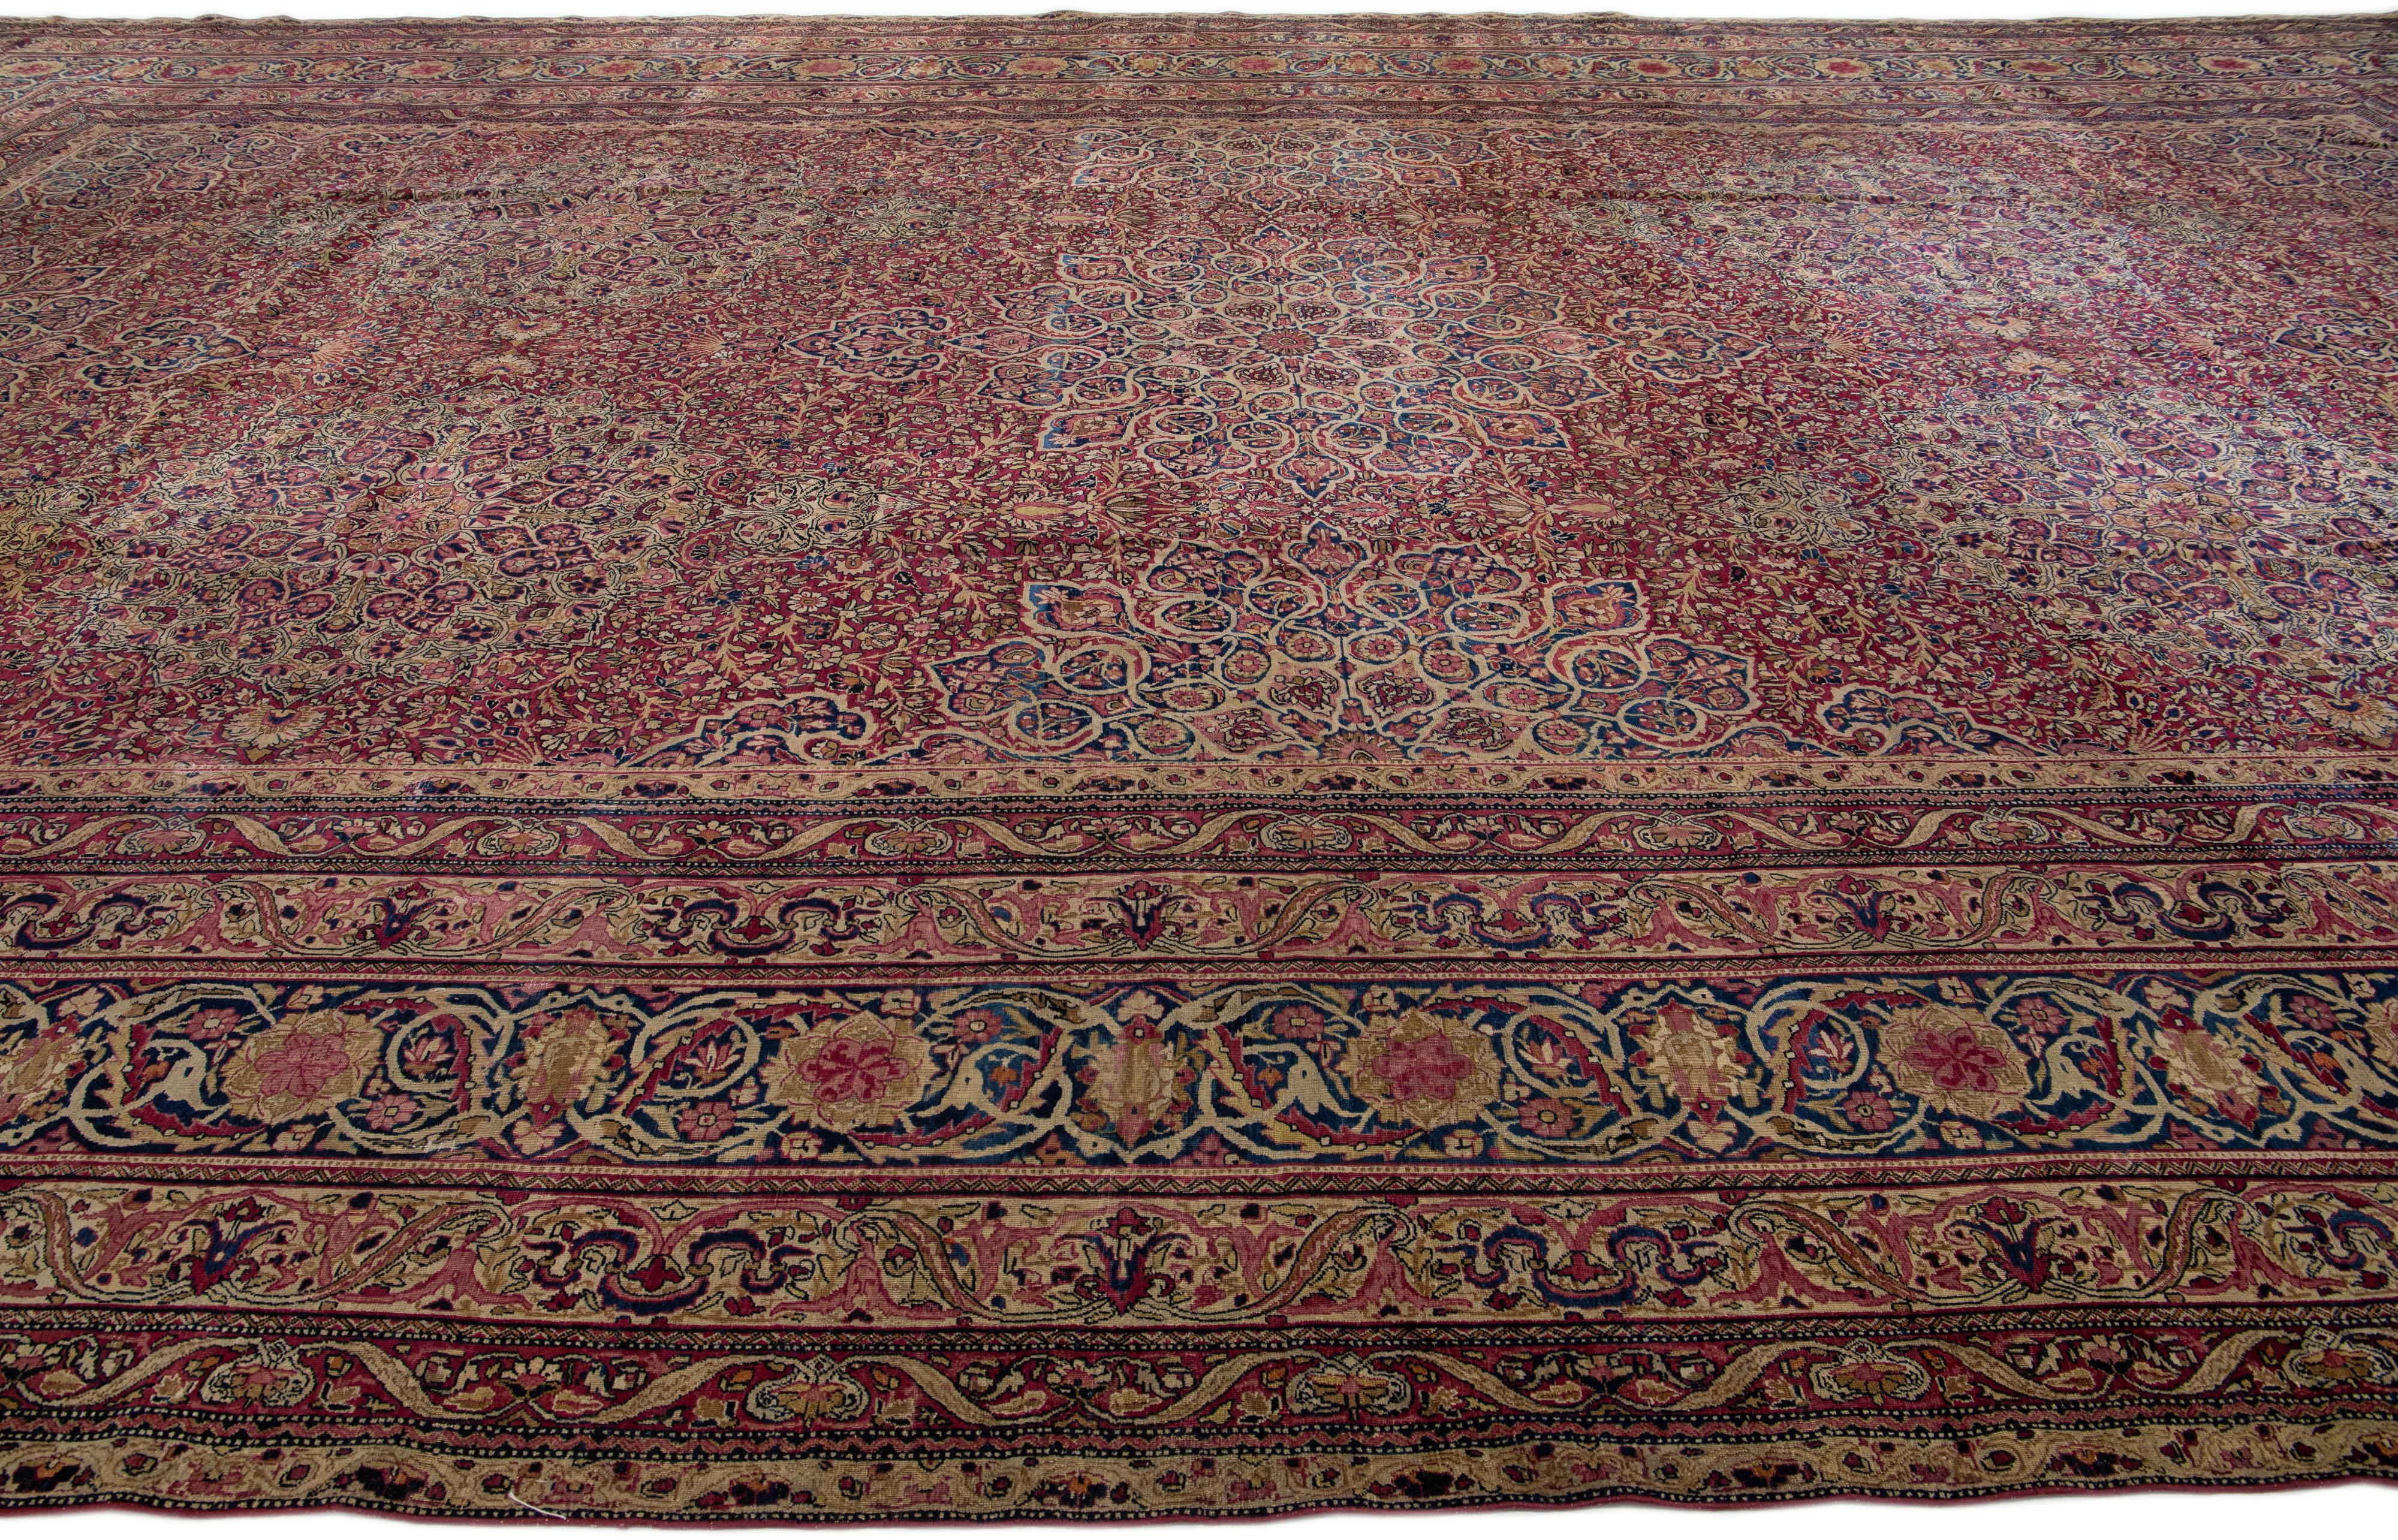 Antique Persian Kerman Handmade Multicolor Wool Rug with Rosette Design In Good Condition For Sale In Norwalk, CT